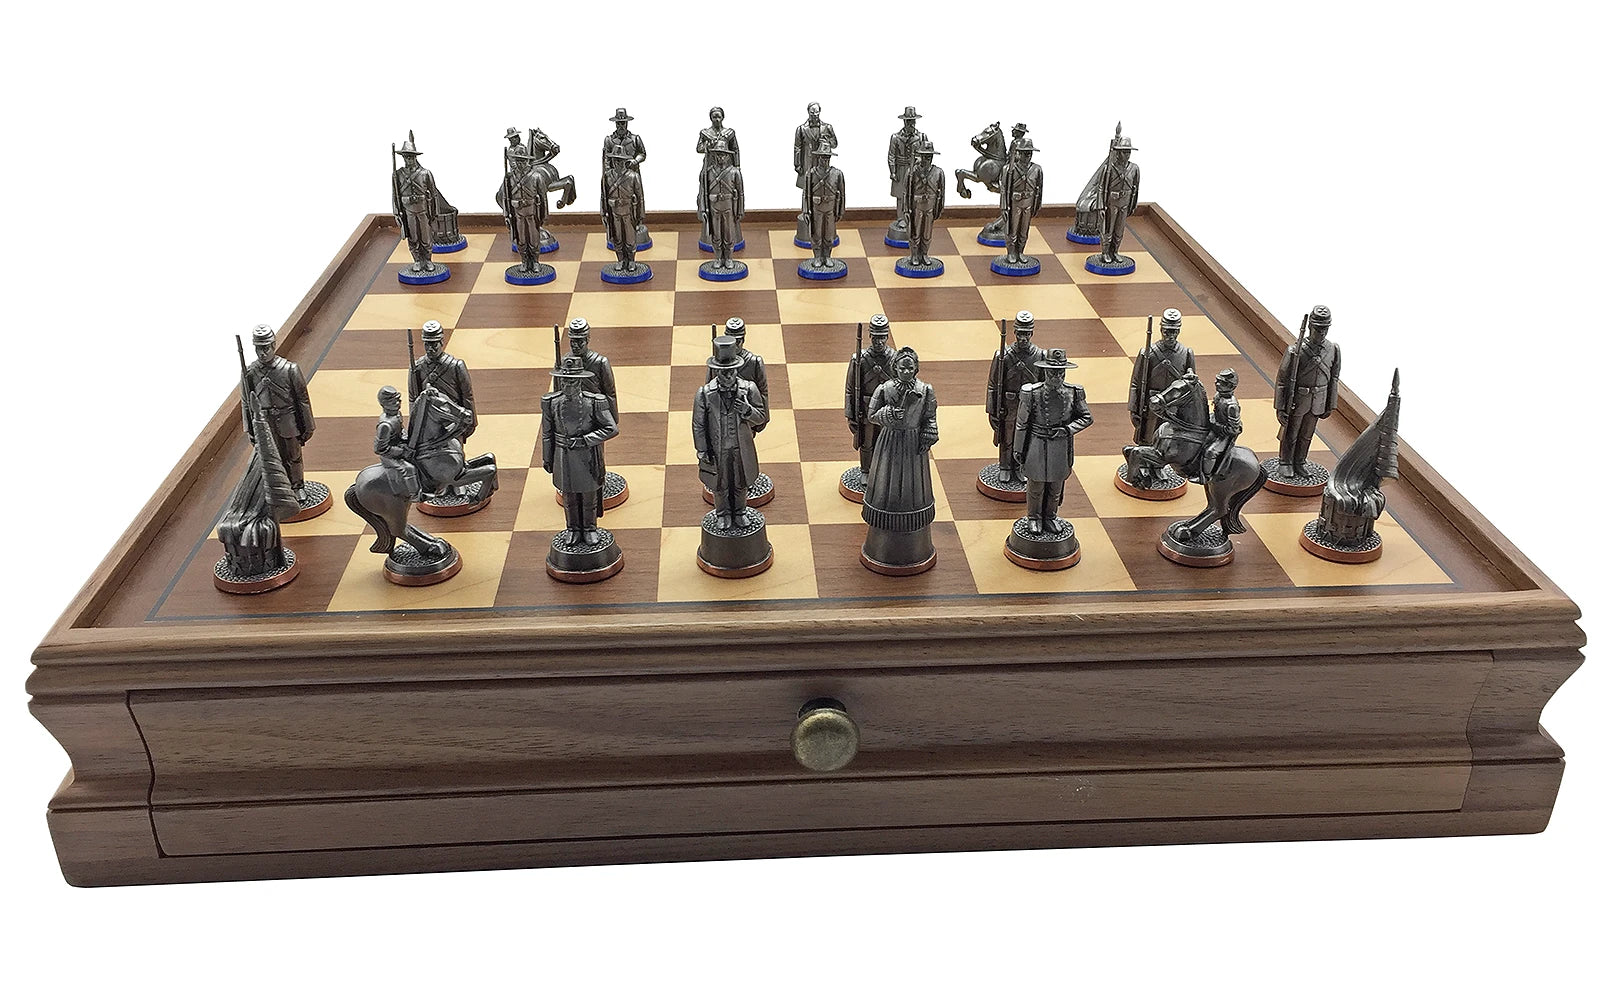 Toy soldier antique finish American Civil War Chess Set.